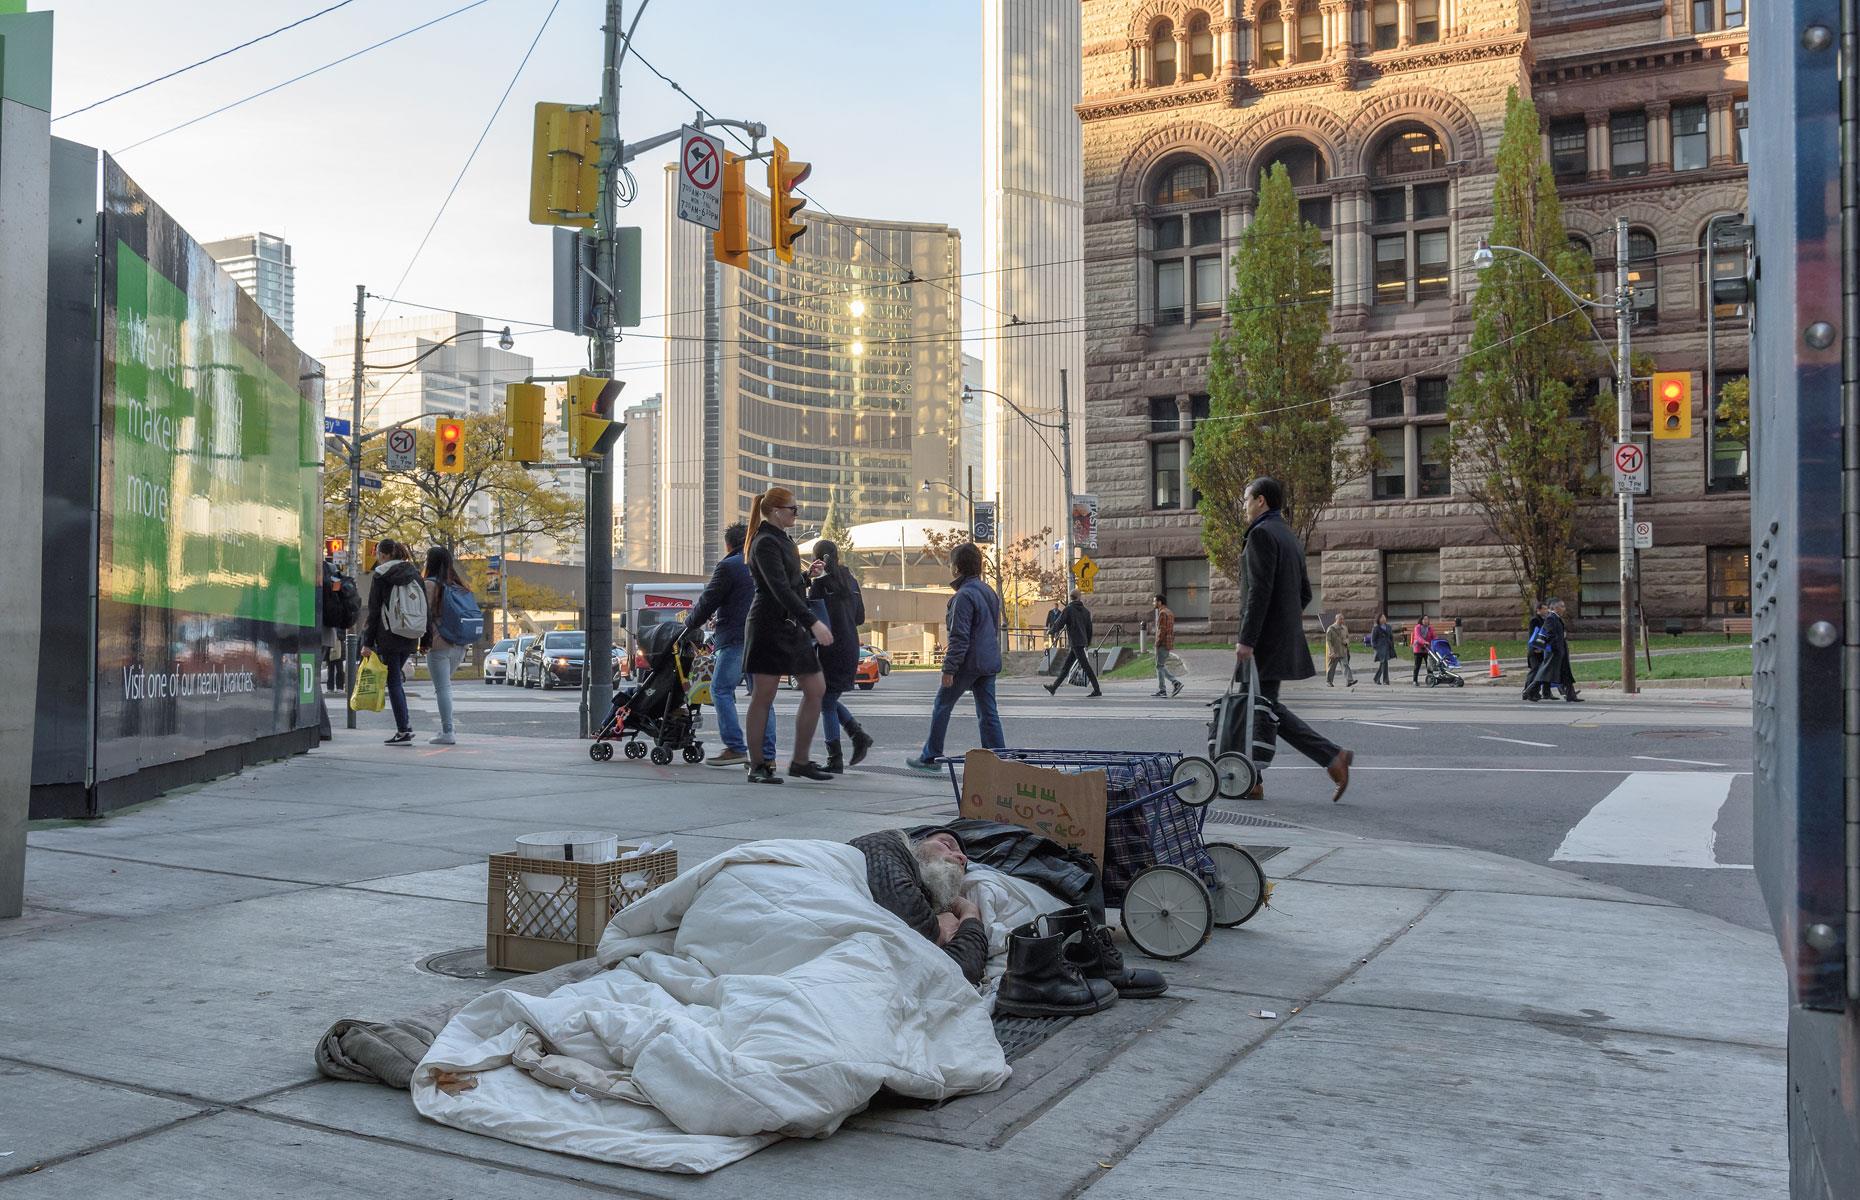 Canada: 11.6% of the population in poverty